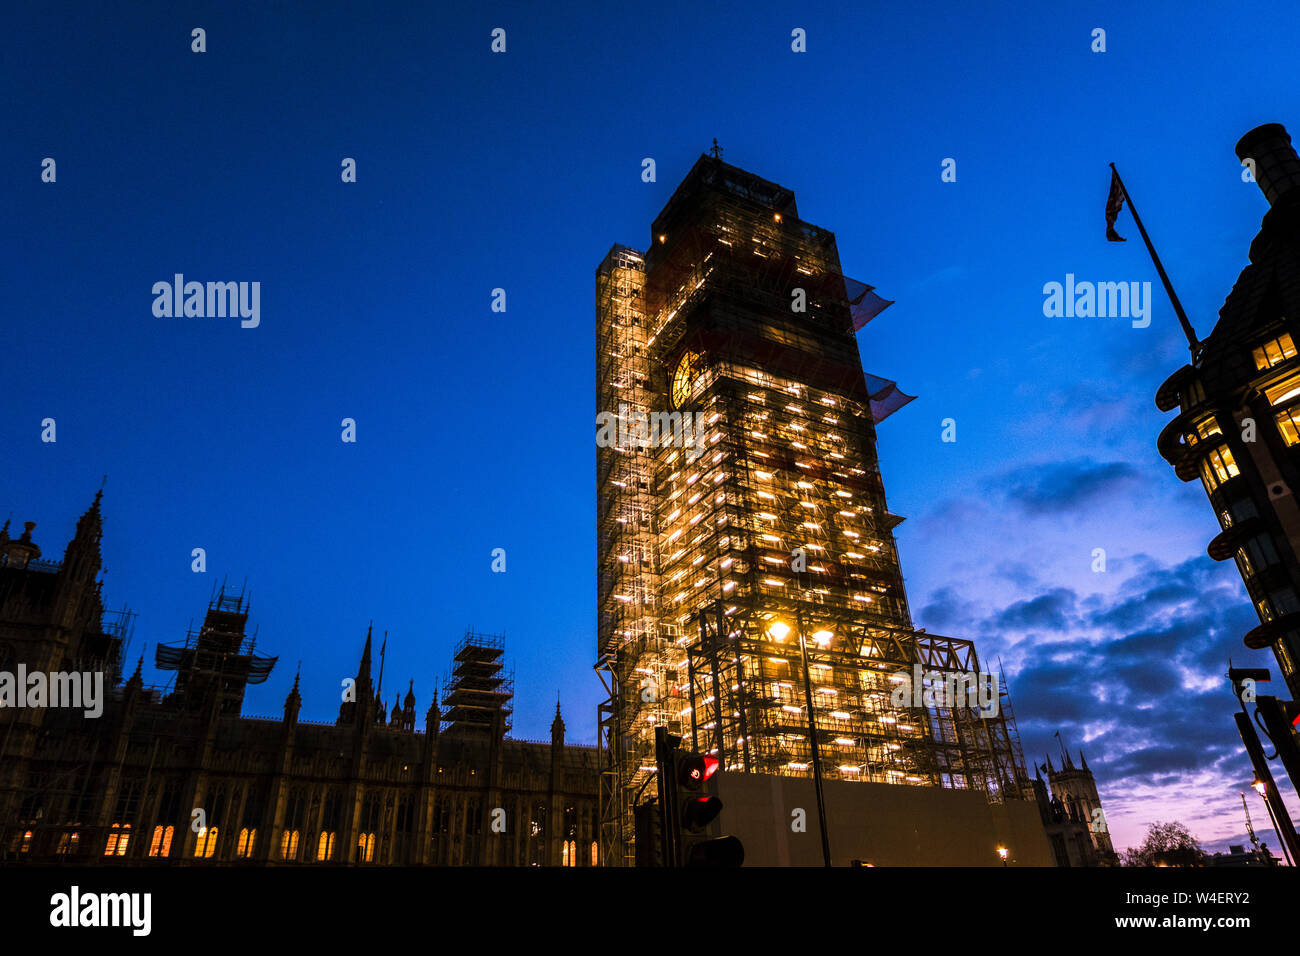 London, UK - March 20 2018: The Elizabeth Tower, the Great Clock and the Great Bell, known as Big Ben, the iconic landmark of London, being scaffolded Stock Photo